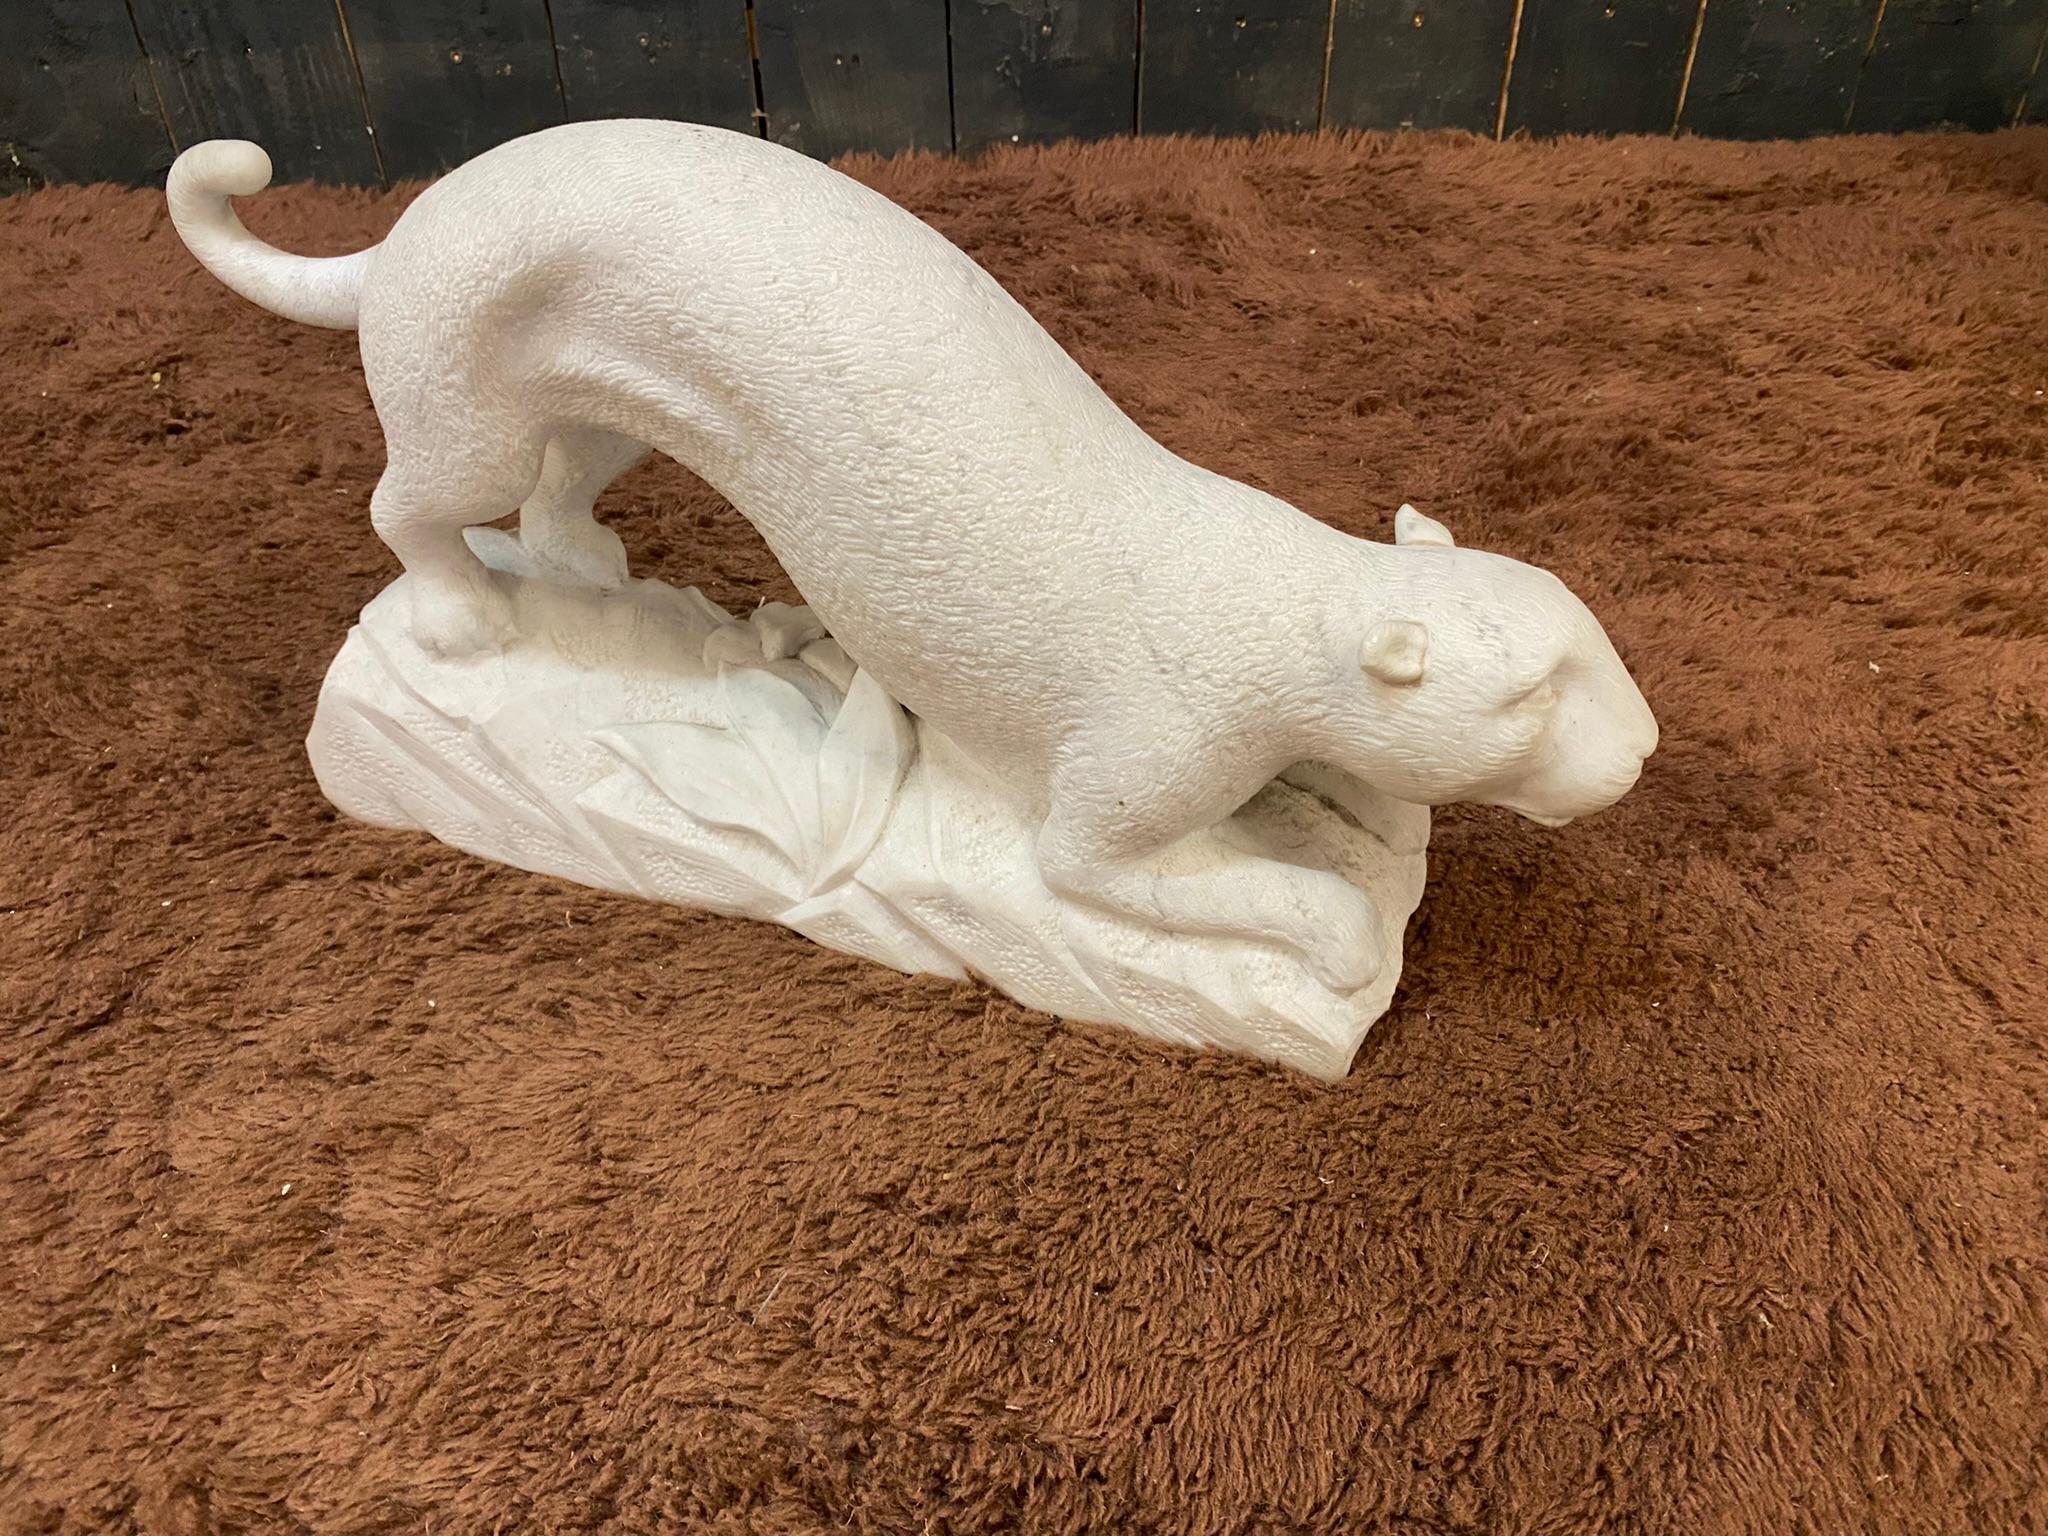 Original Art Deco marble sculpture circa 1930;
Direct carving
the tail has been glued back on, visible repair